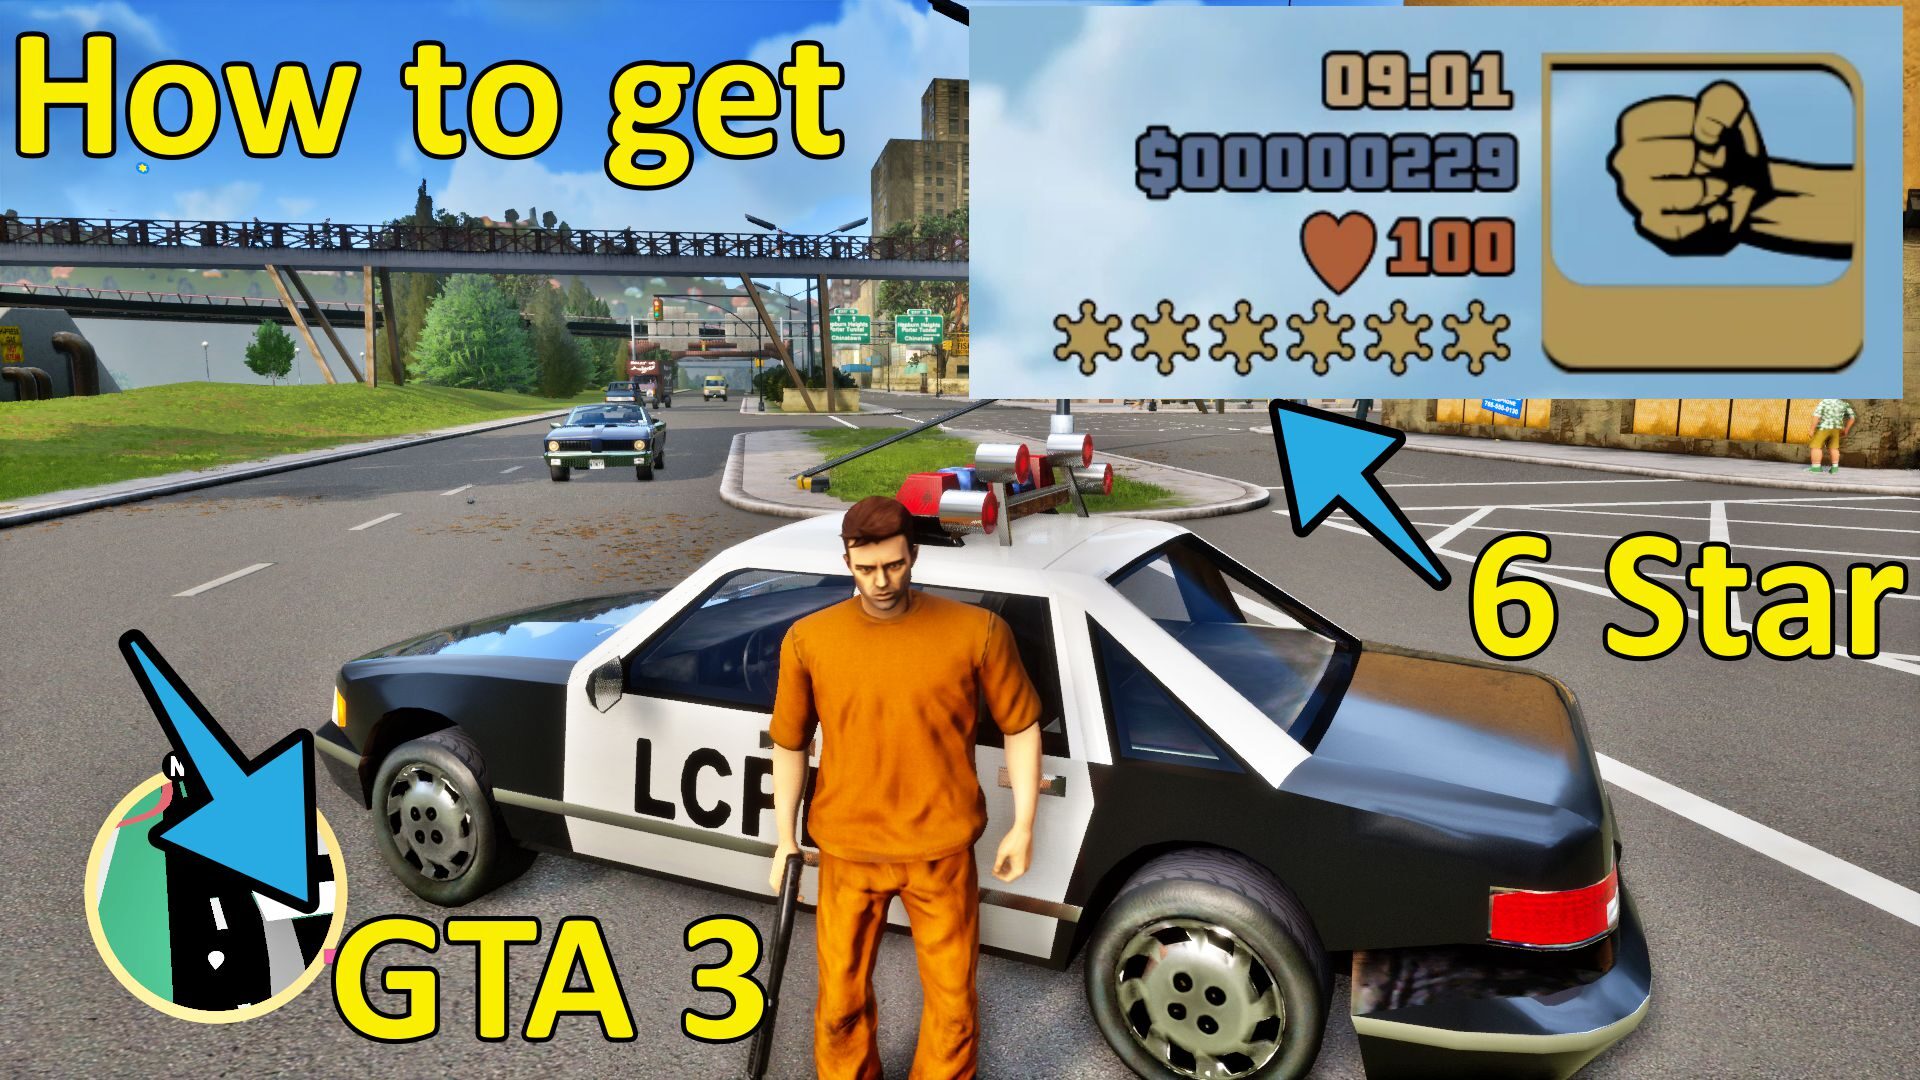 How to get 6 stars wanted level in GTA 3 Definitive Edition